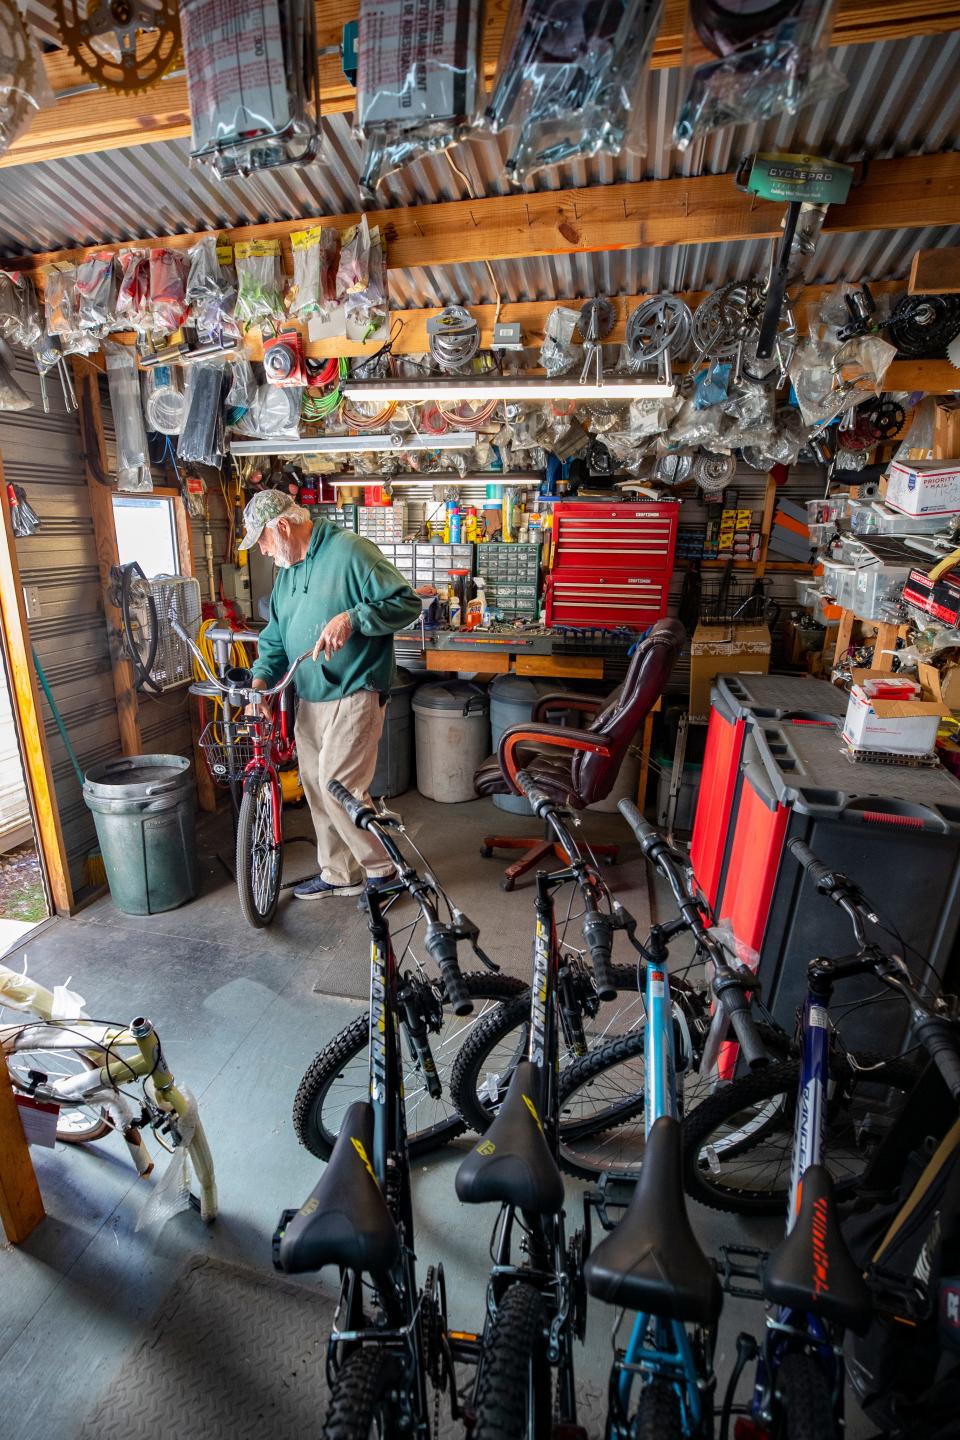 Mike Jones, aka Salvage Santa, takes old bicycles and makes them new again in his workshop on the northeast side of Panama City. Jones donates about 250 bicycles each year to area charities who distribute them to children for Christmas. His workshop has bicycle parts filling every available space.